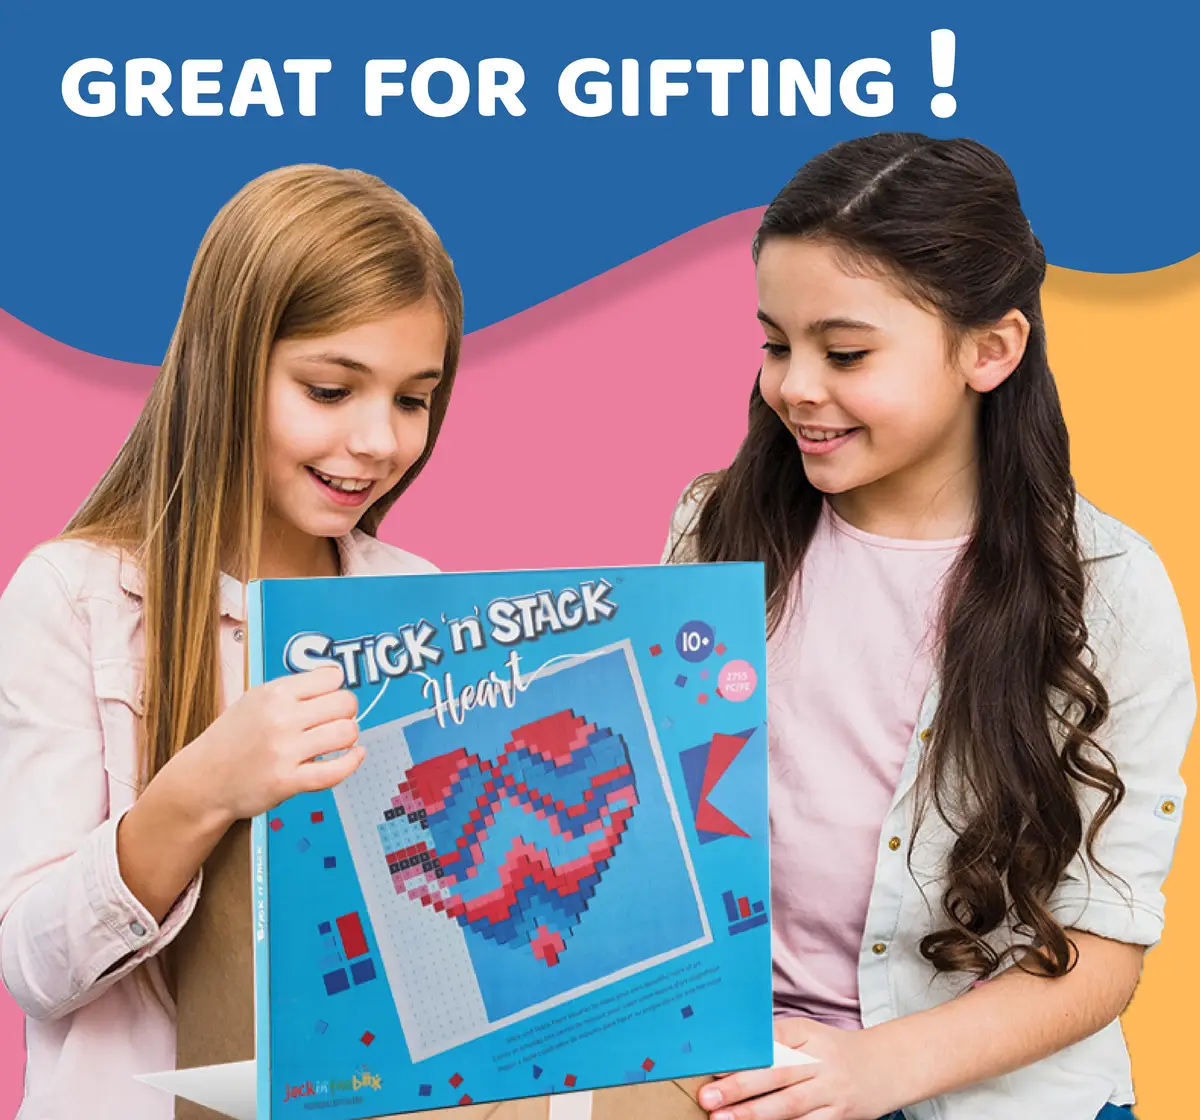 Jack In The Box STICK 'N' STACK Valentine Heart Design Craft Kit with 3D Foam Stickers For Kids of Age 10Y+, Multicolour